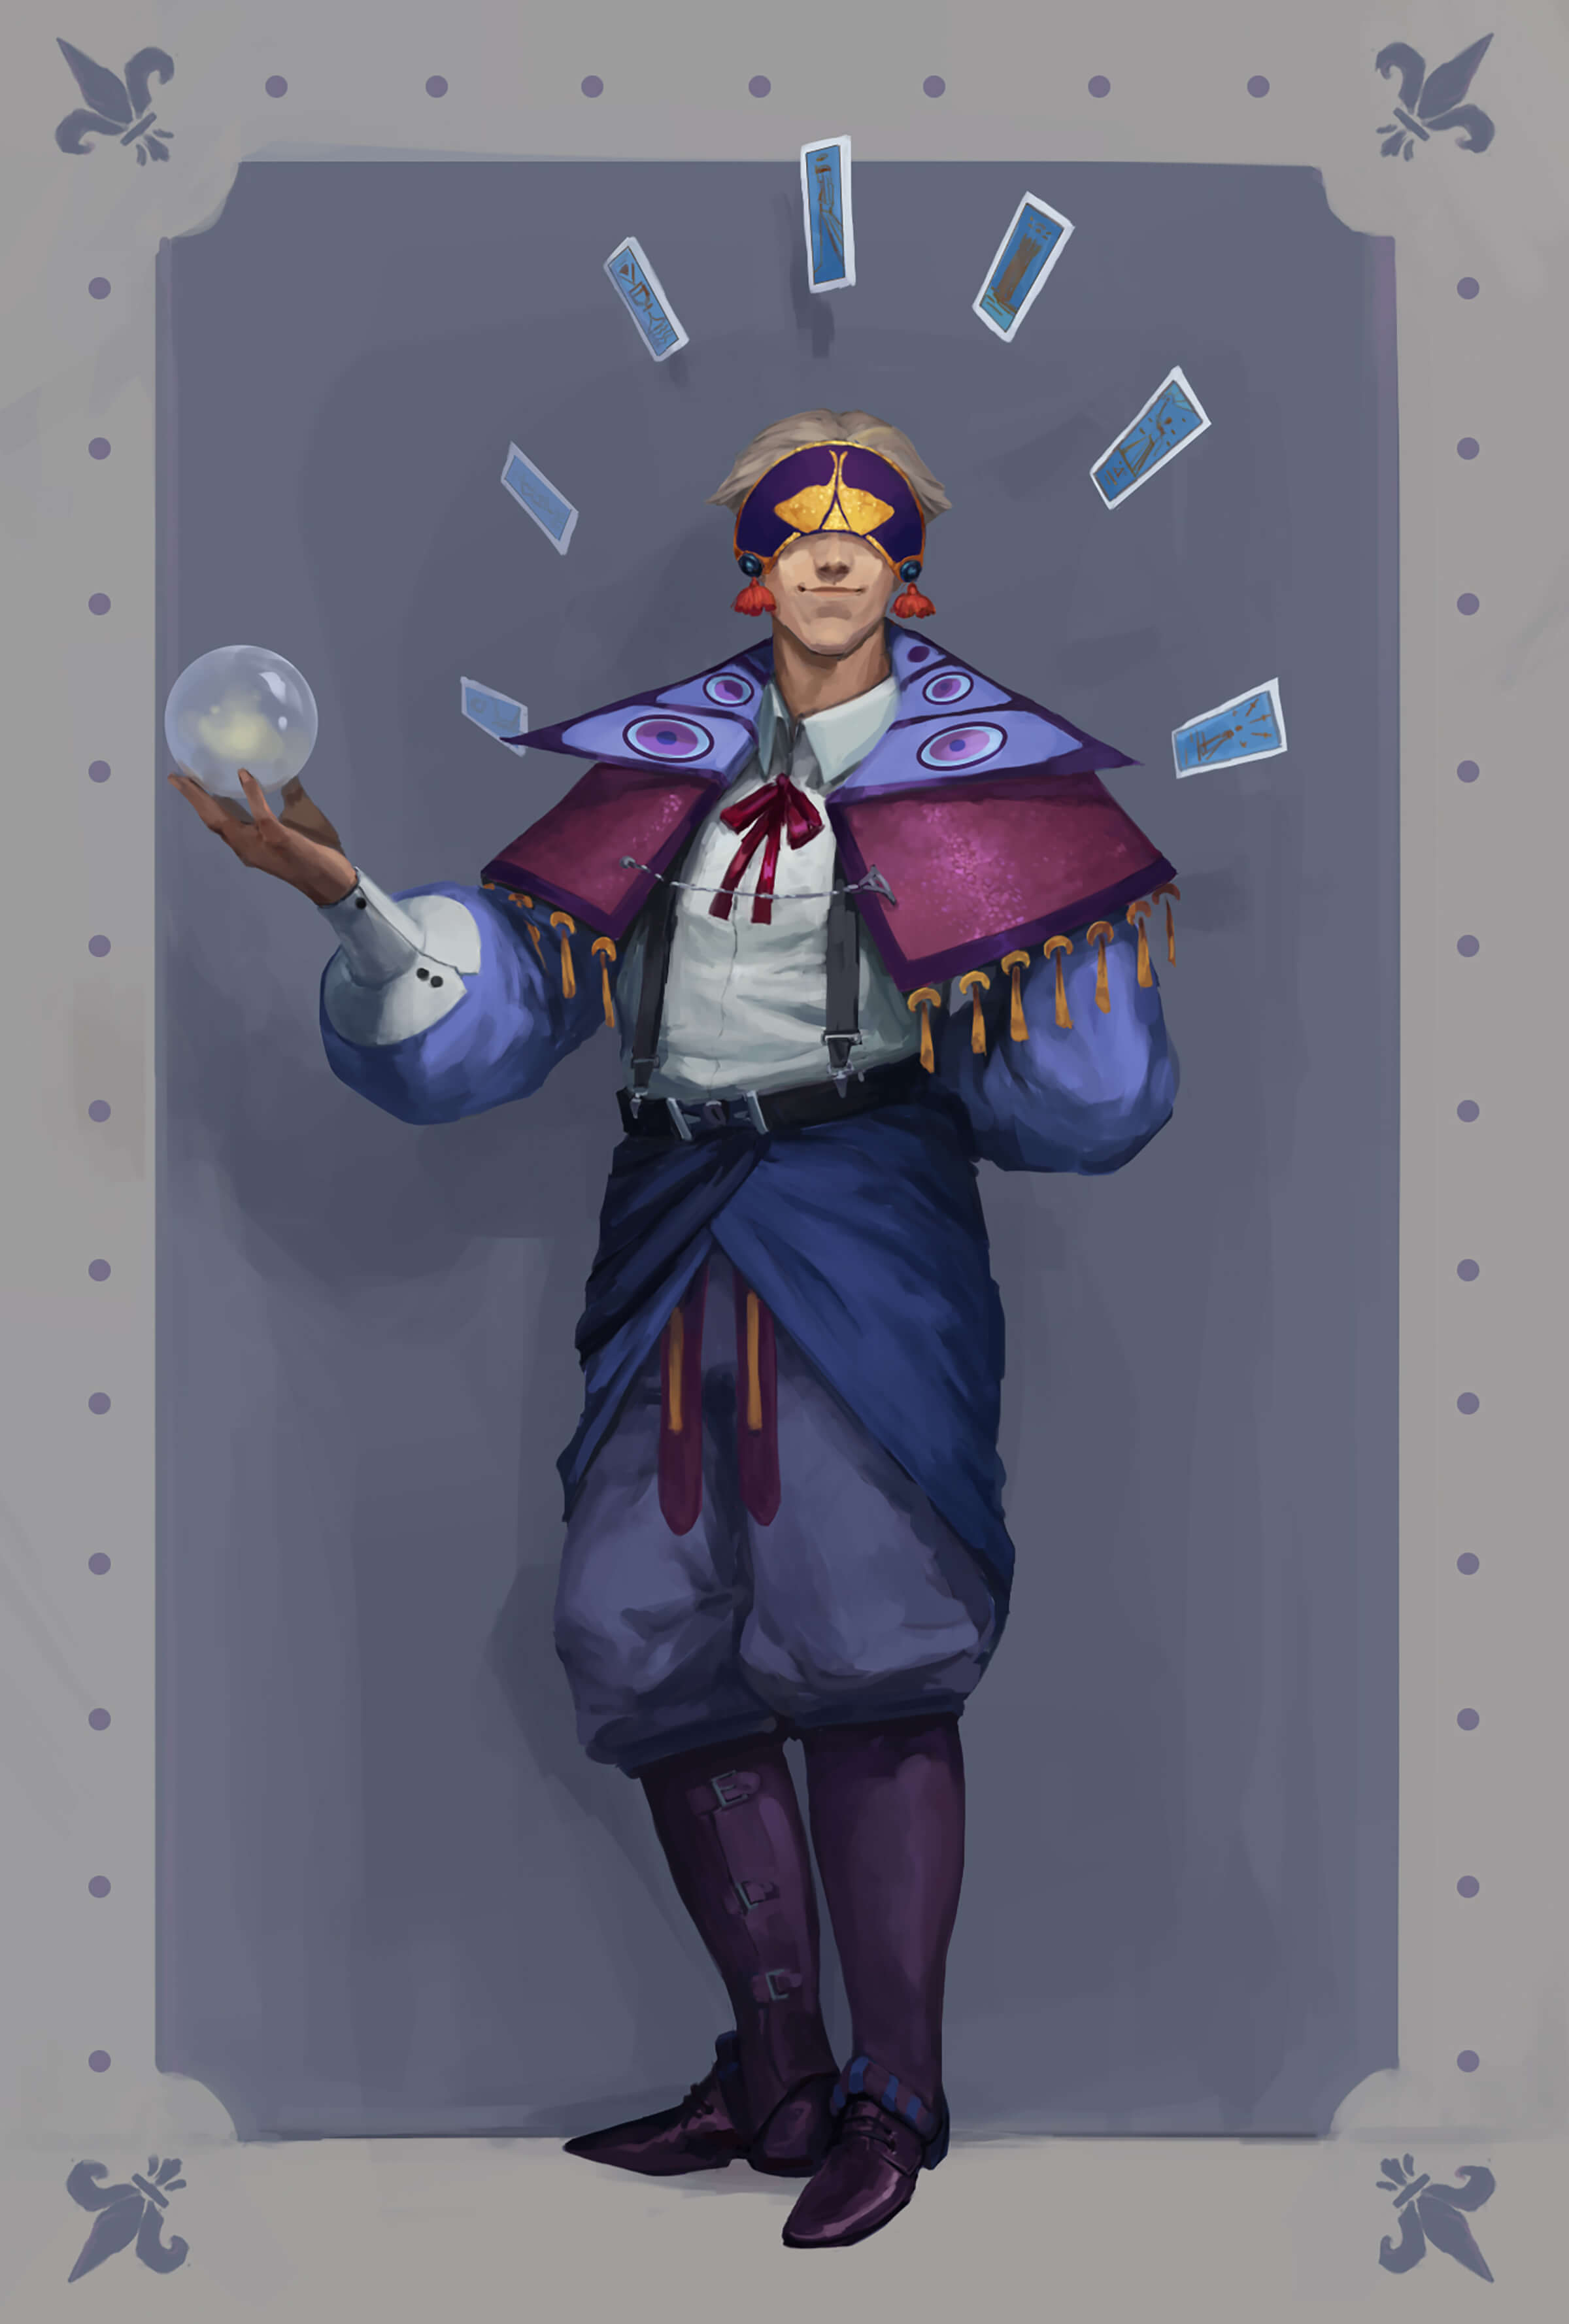 A masked character in a tasseled purple cape carrying a crystal ball